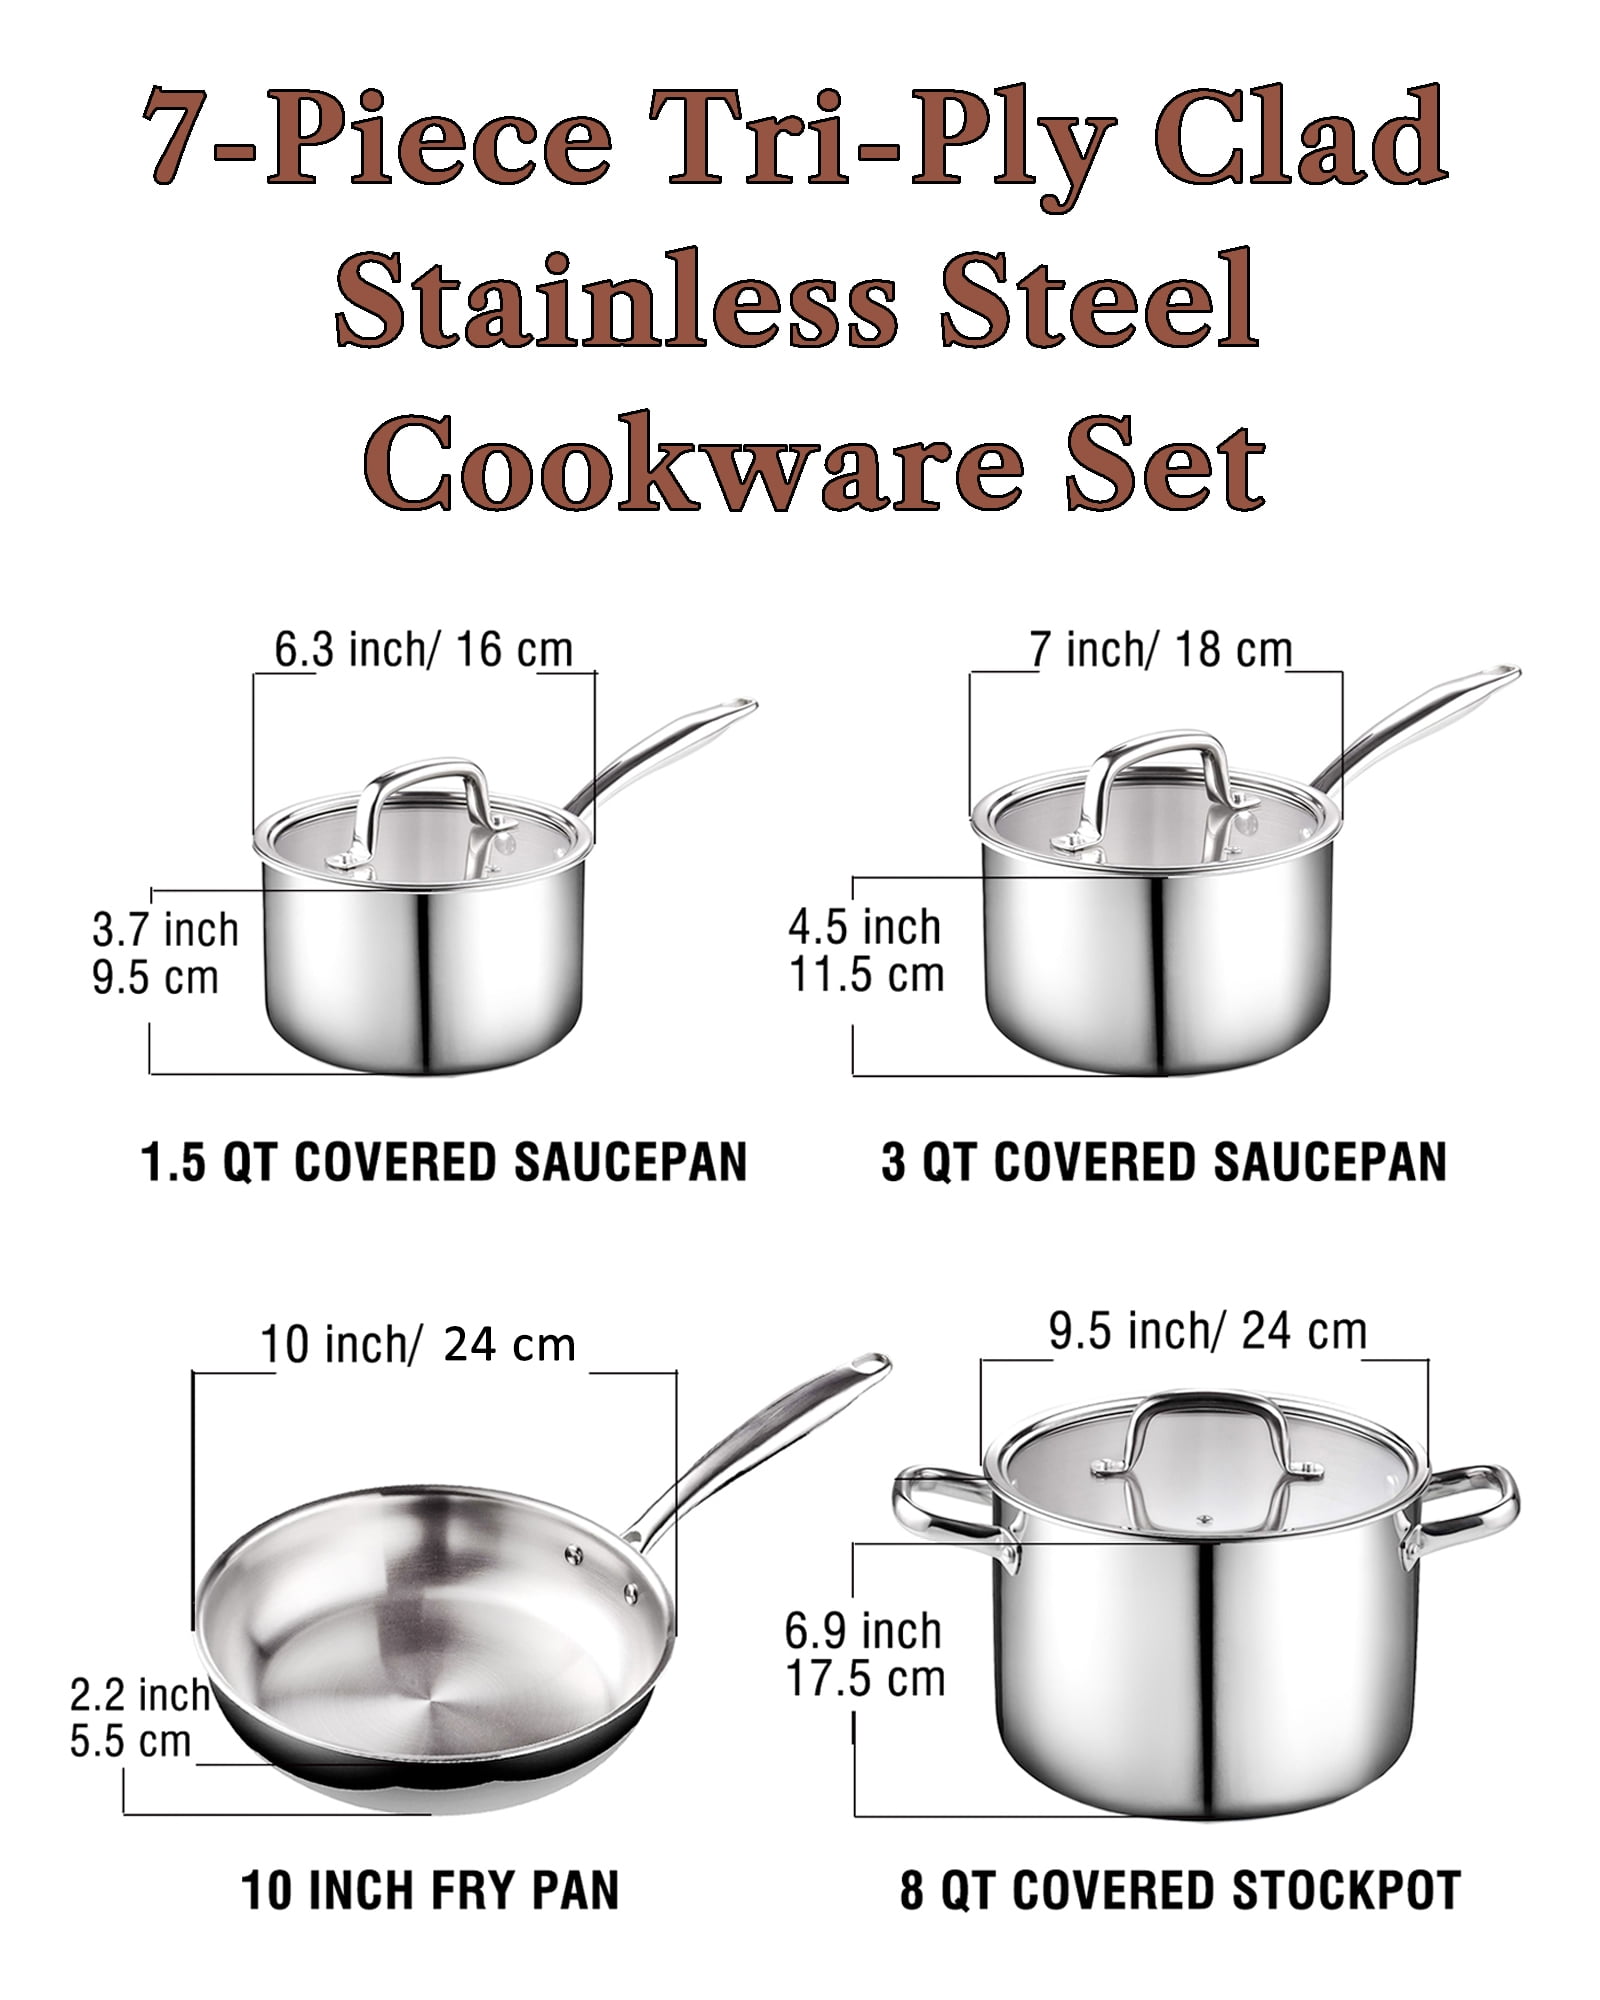 J&V Textiles 7-Piece Stainless Steel Cookware Pots and Pans Set with Wooden Handles, Silver